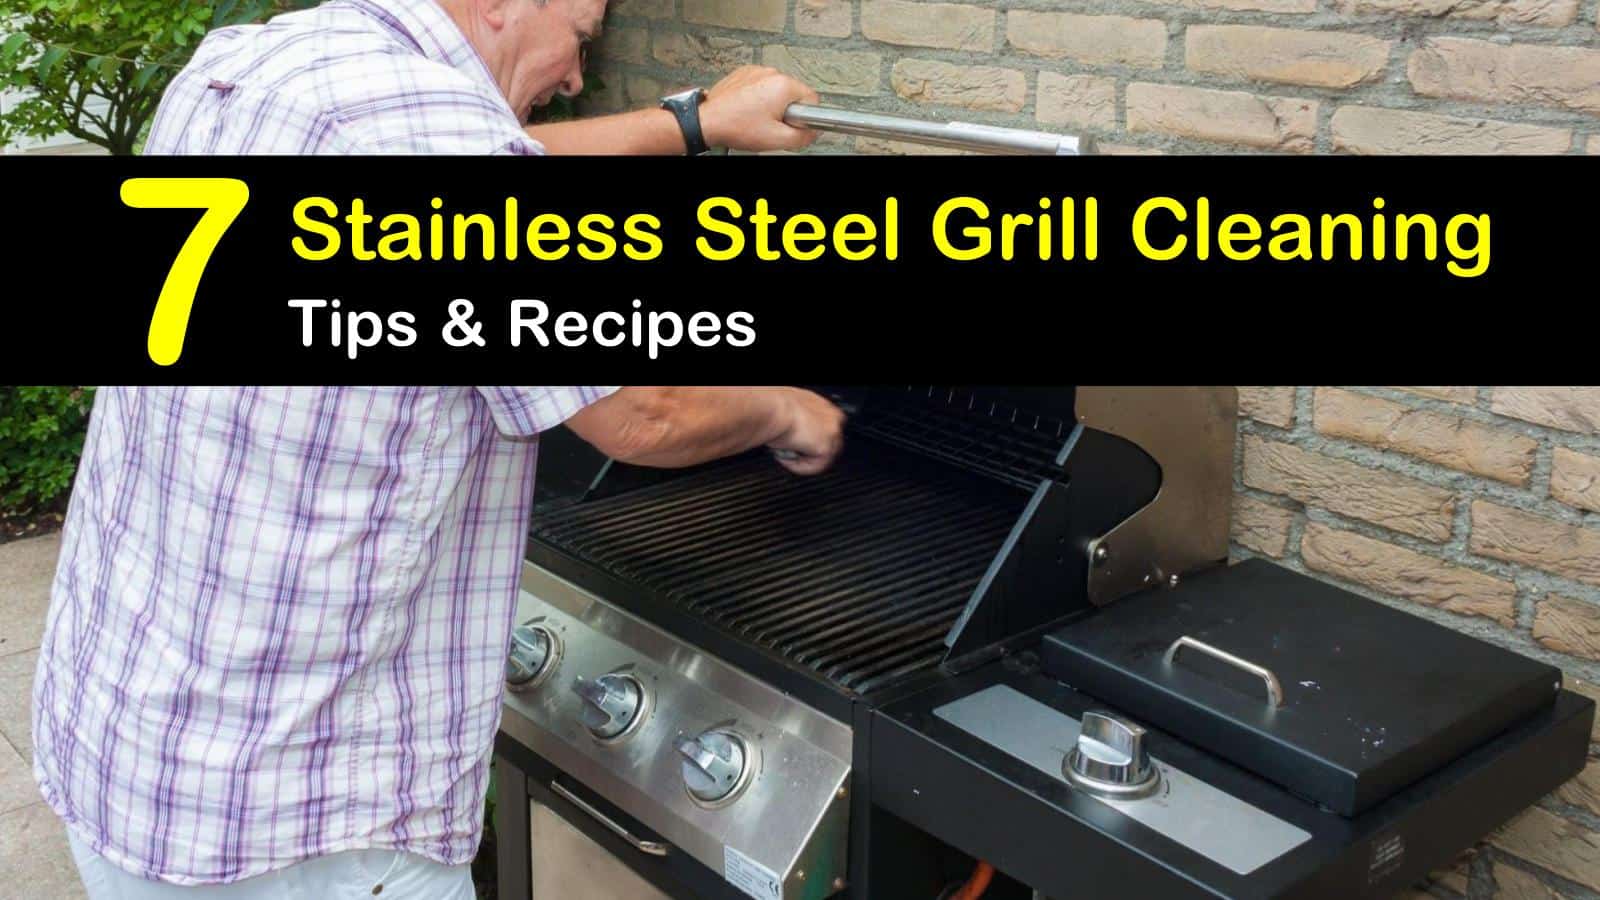 how to clean a stainless steel grill titleimg1